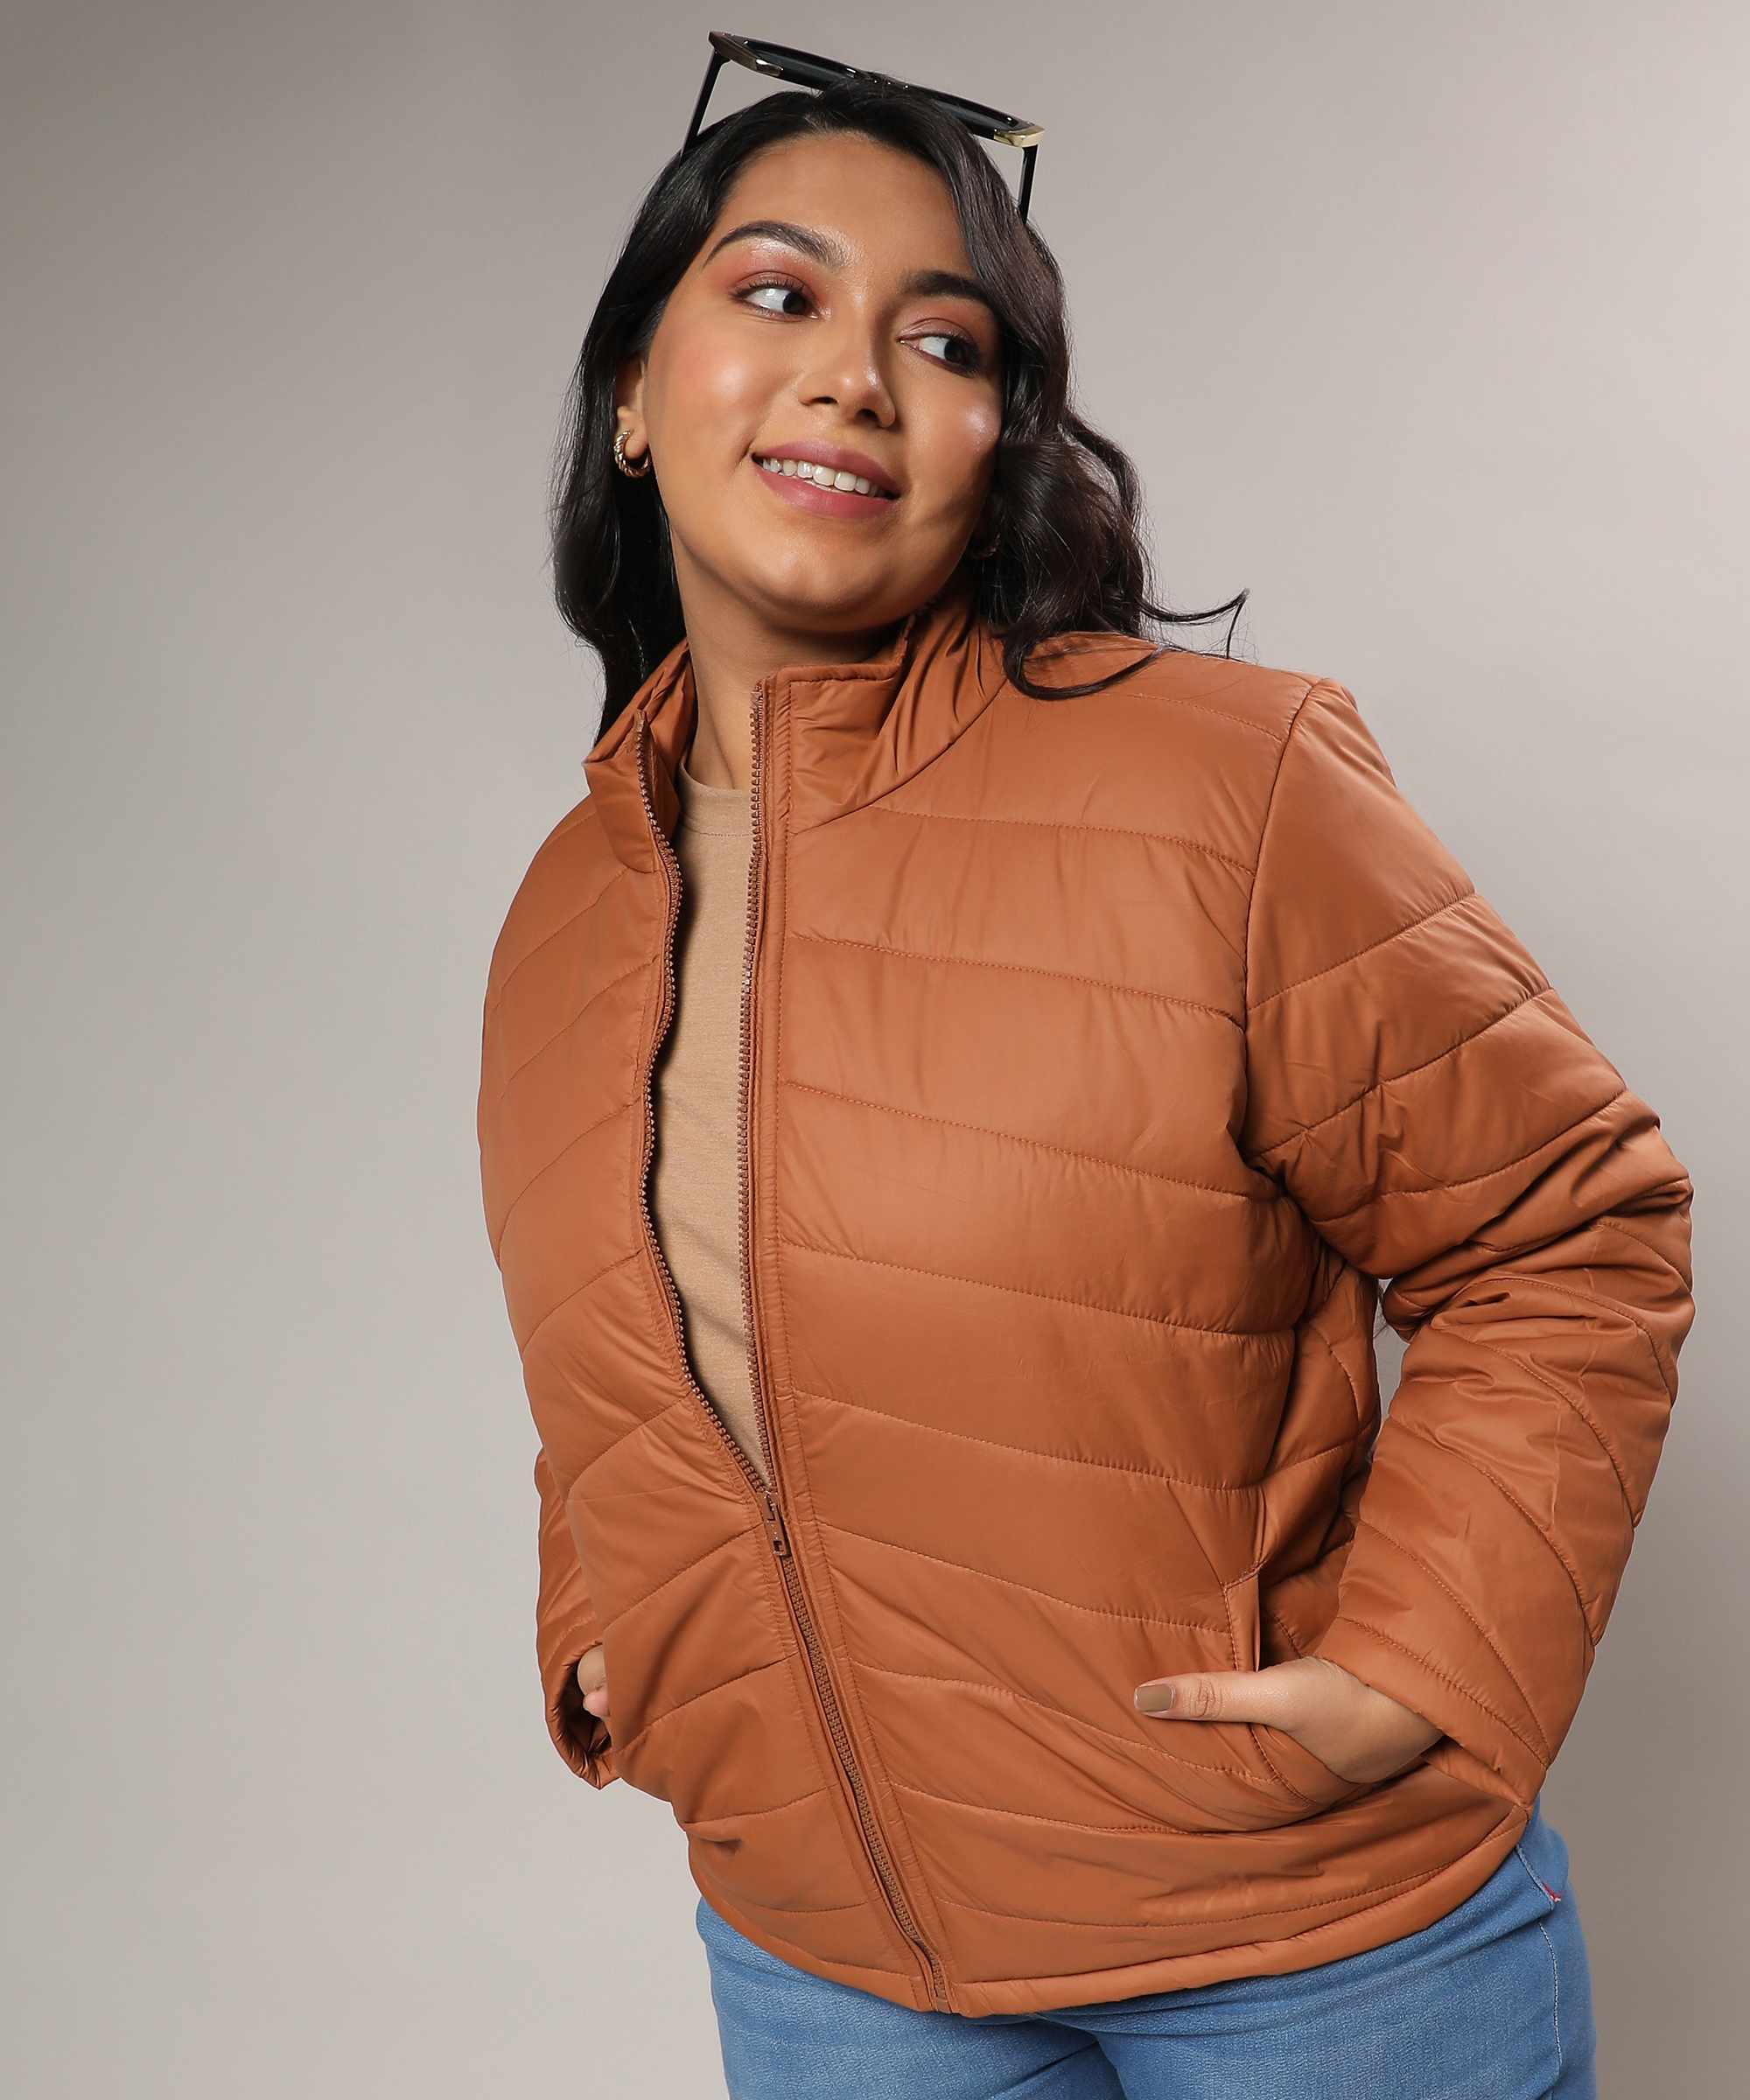 Instafab Plus | Women's Tan Brown Quilted Puffer Jacket With Zip Closure